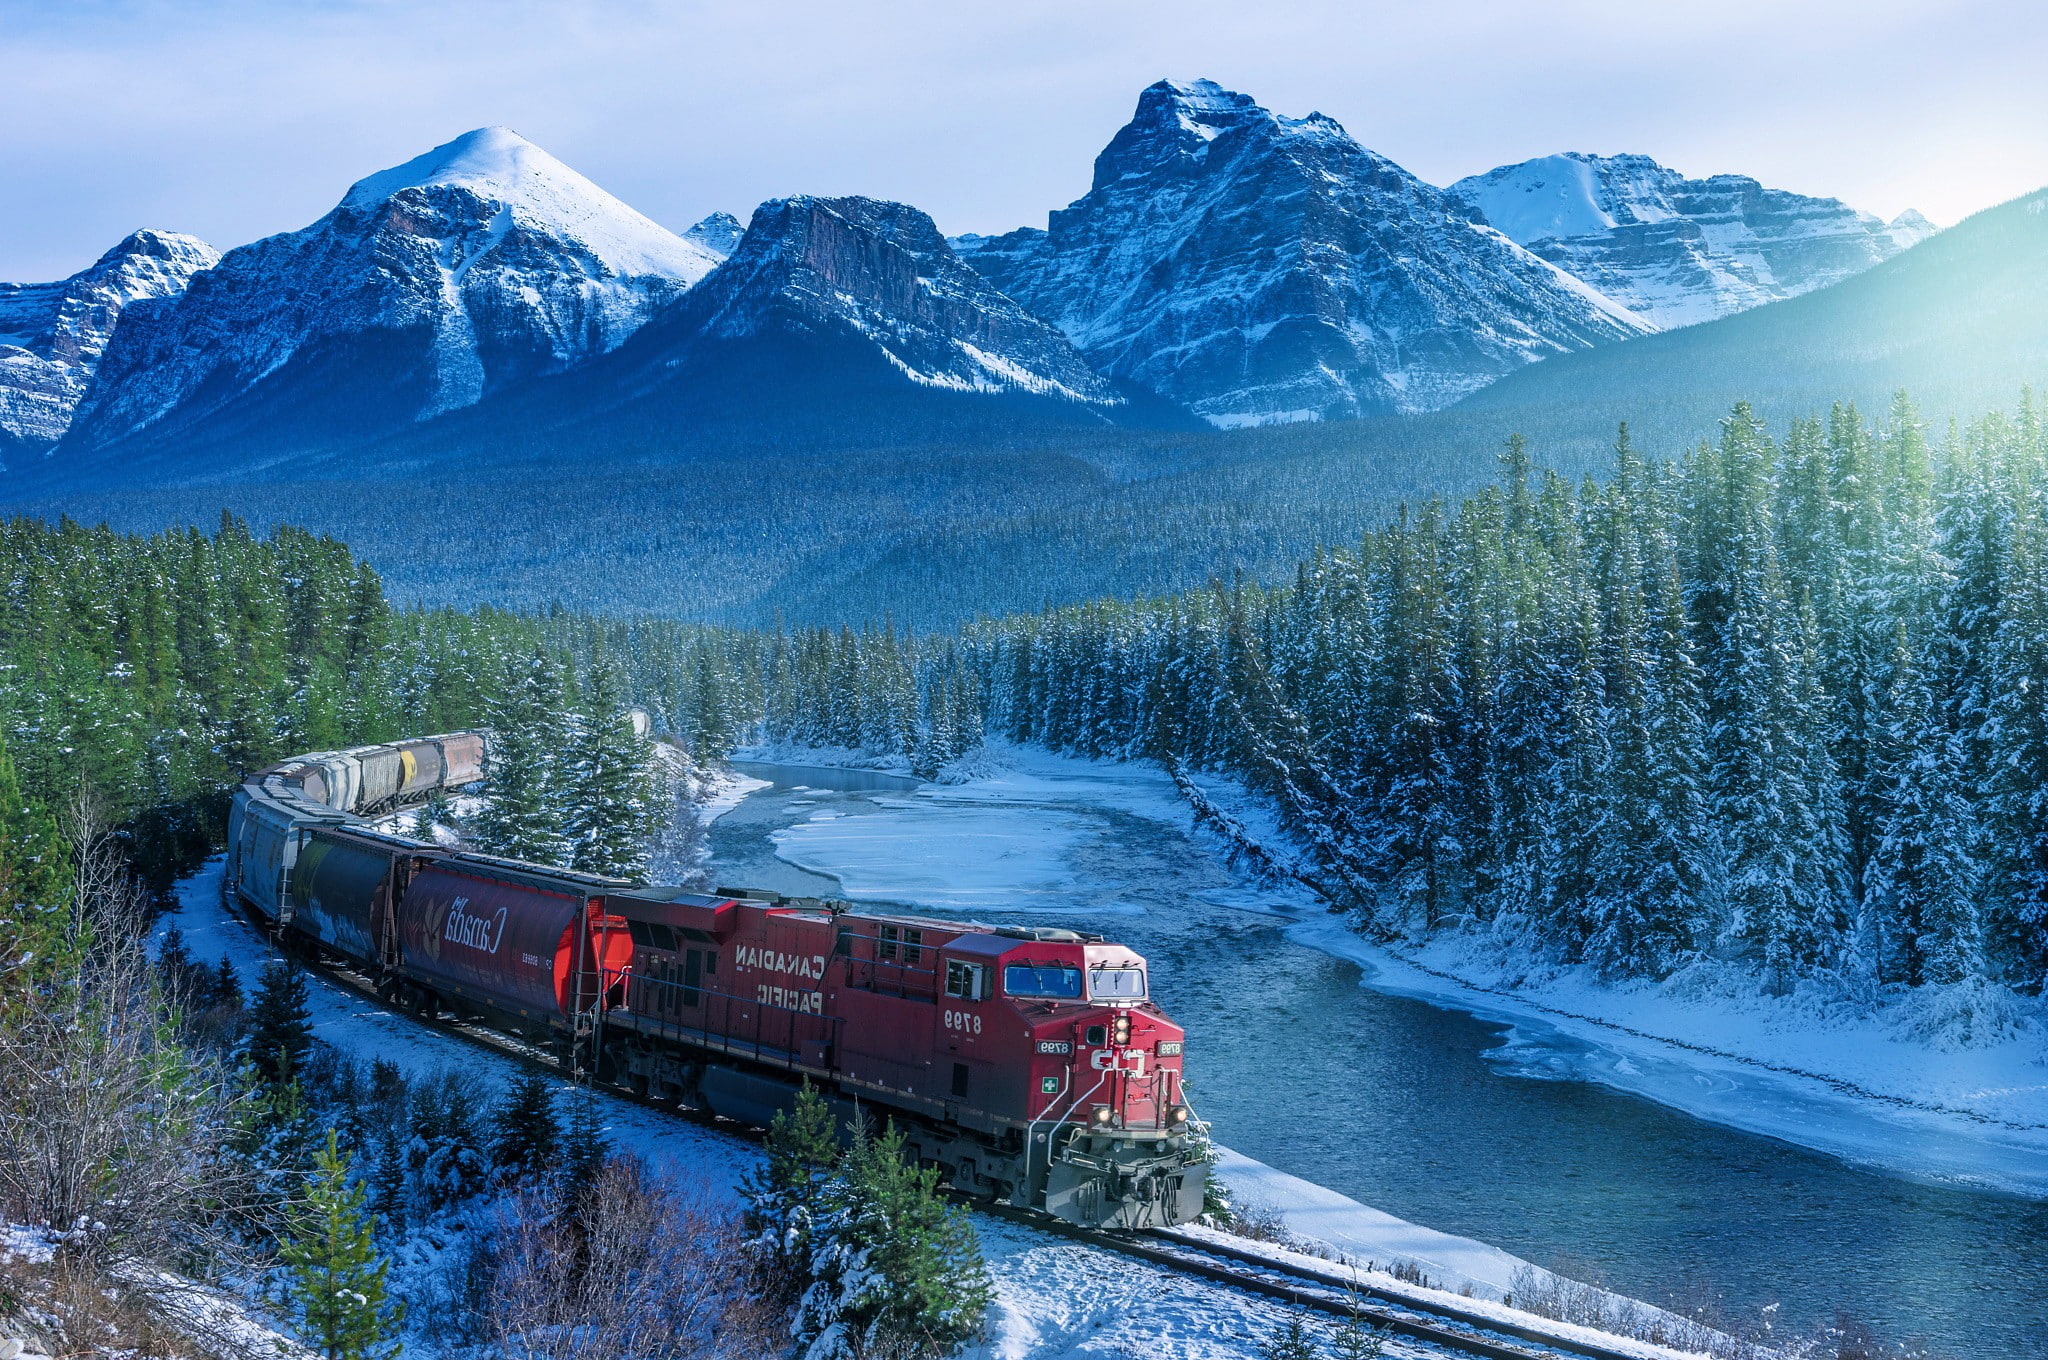 Canada, forest, ice, landscape, mountain, Railway, river, Rocky Mountains